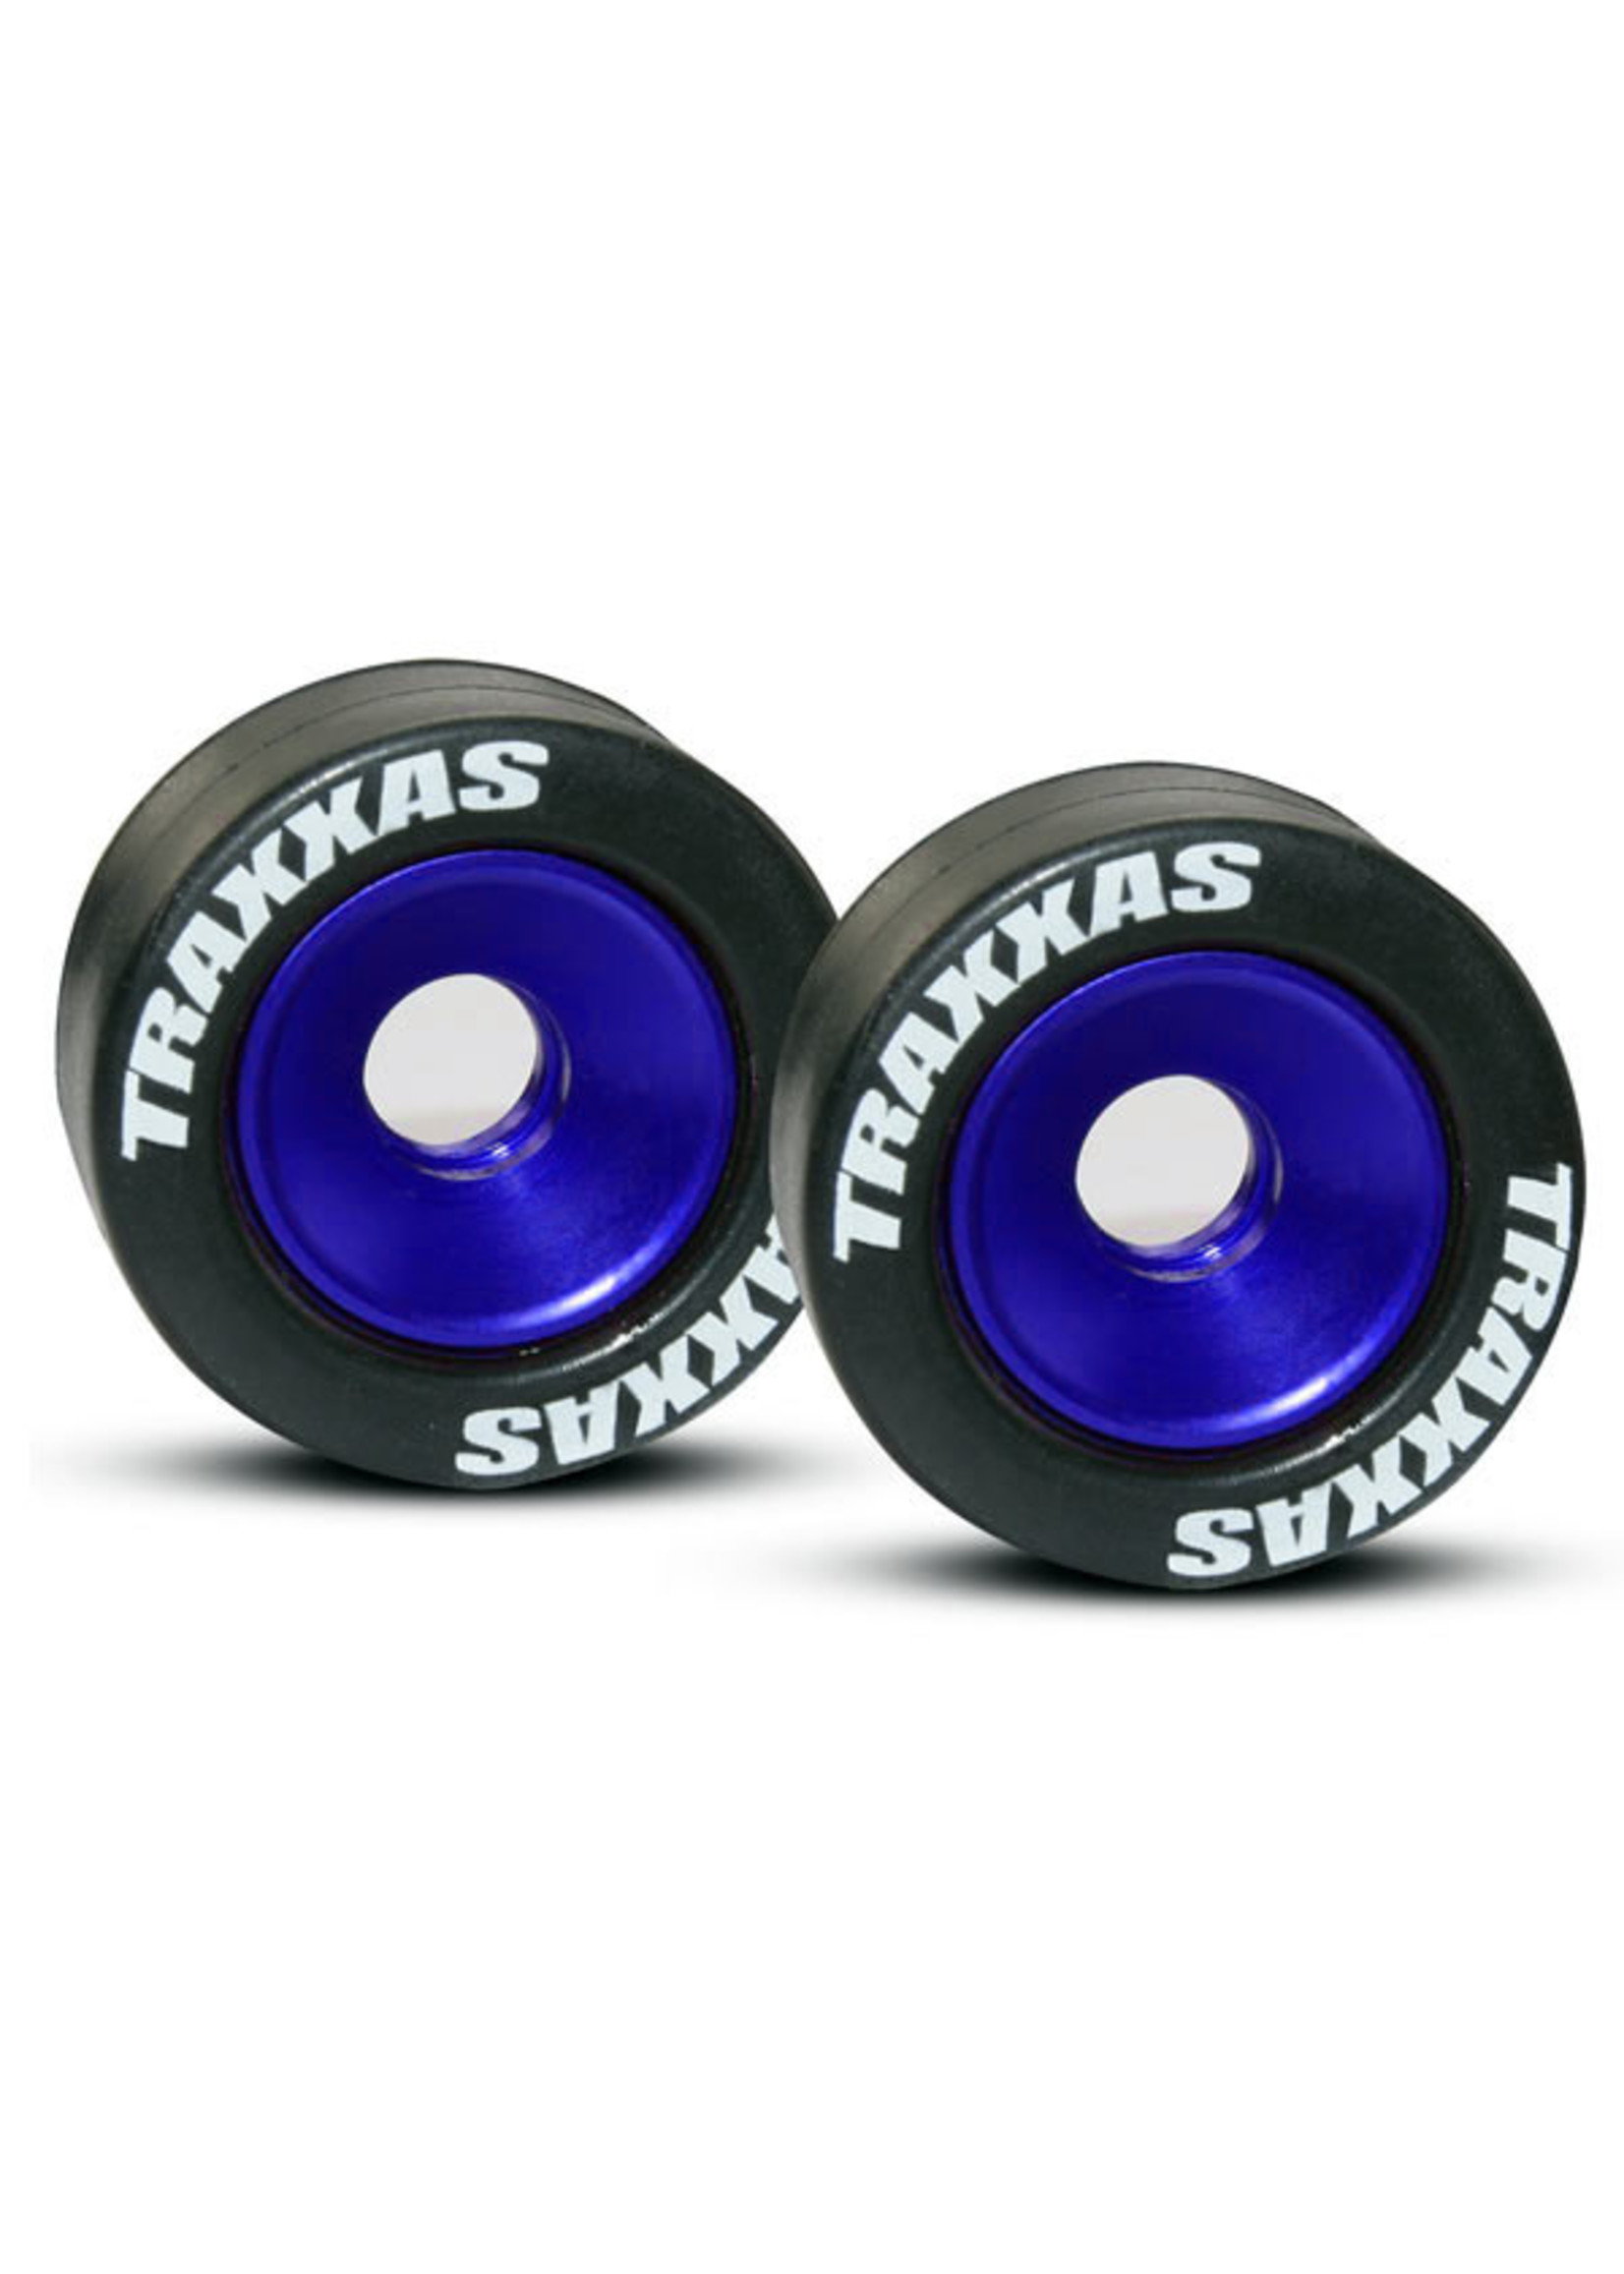 Traxxas 5186A - Machined Aluminum Ball Bearing Wheels with Rubber Tires - Blue